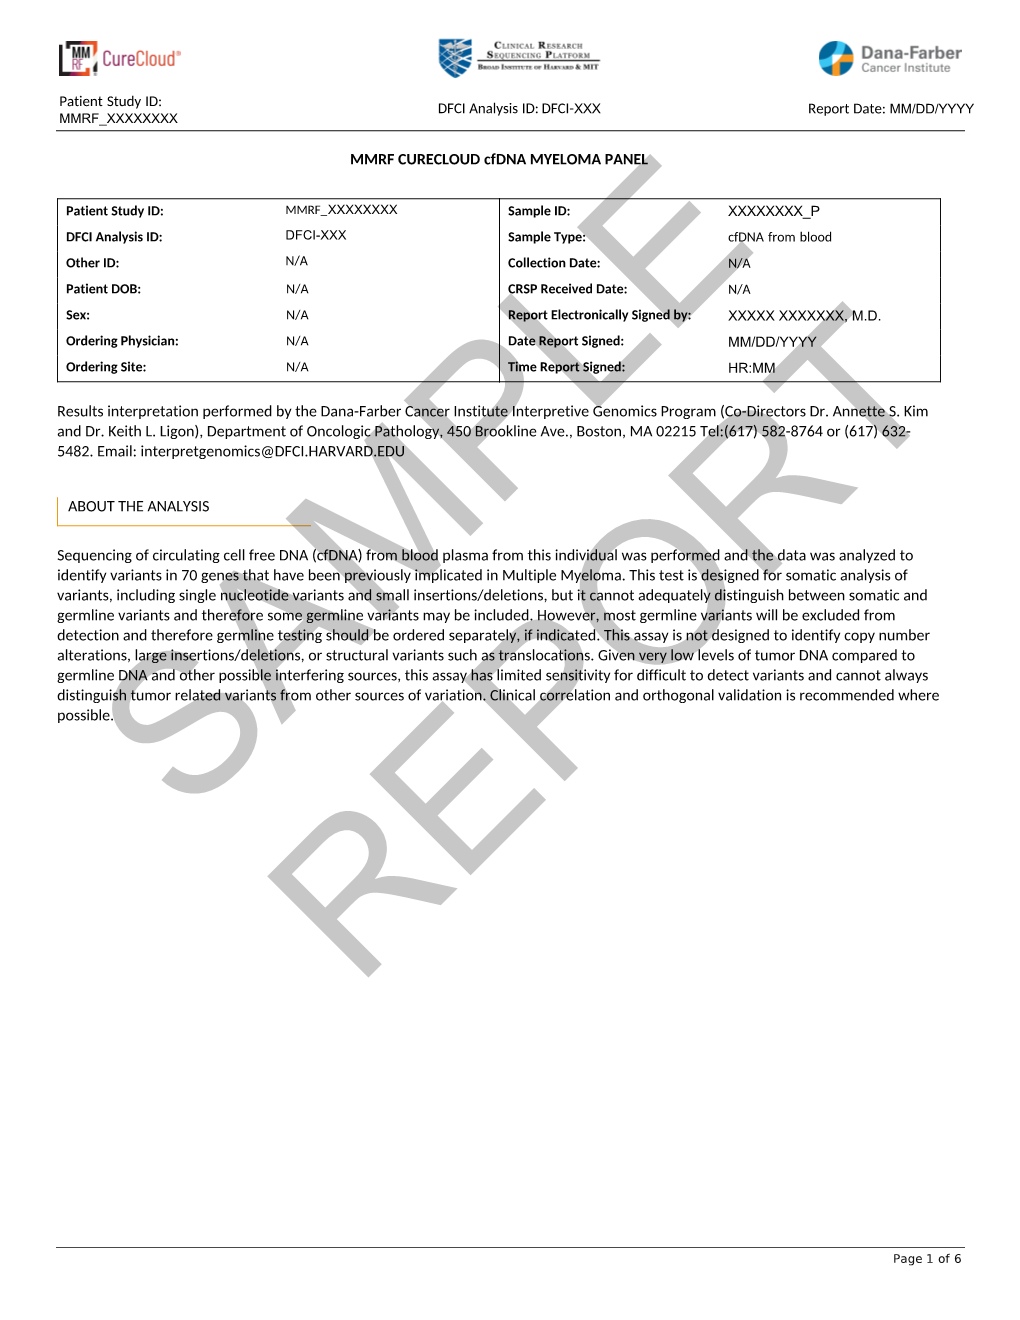 Download Sample Reports